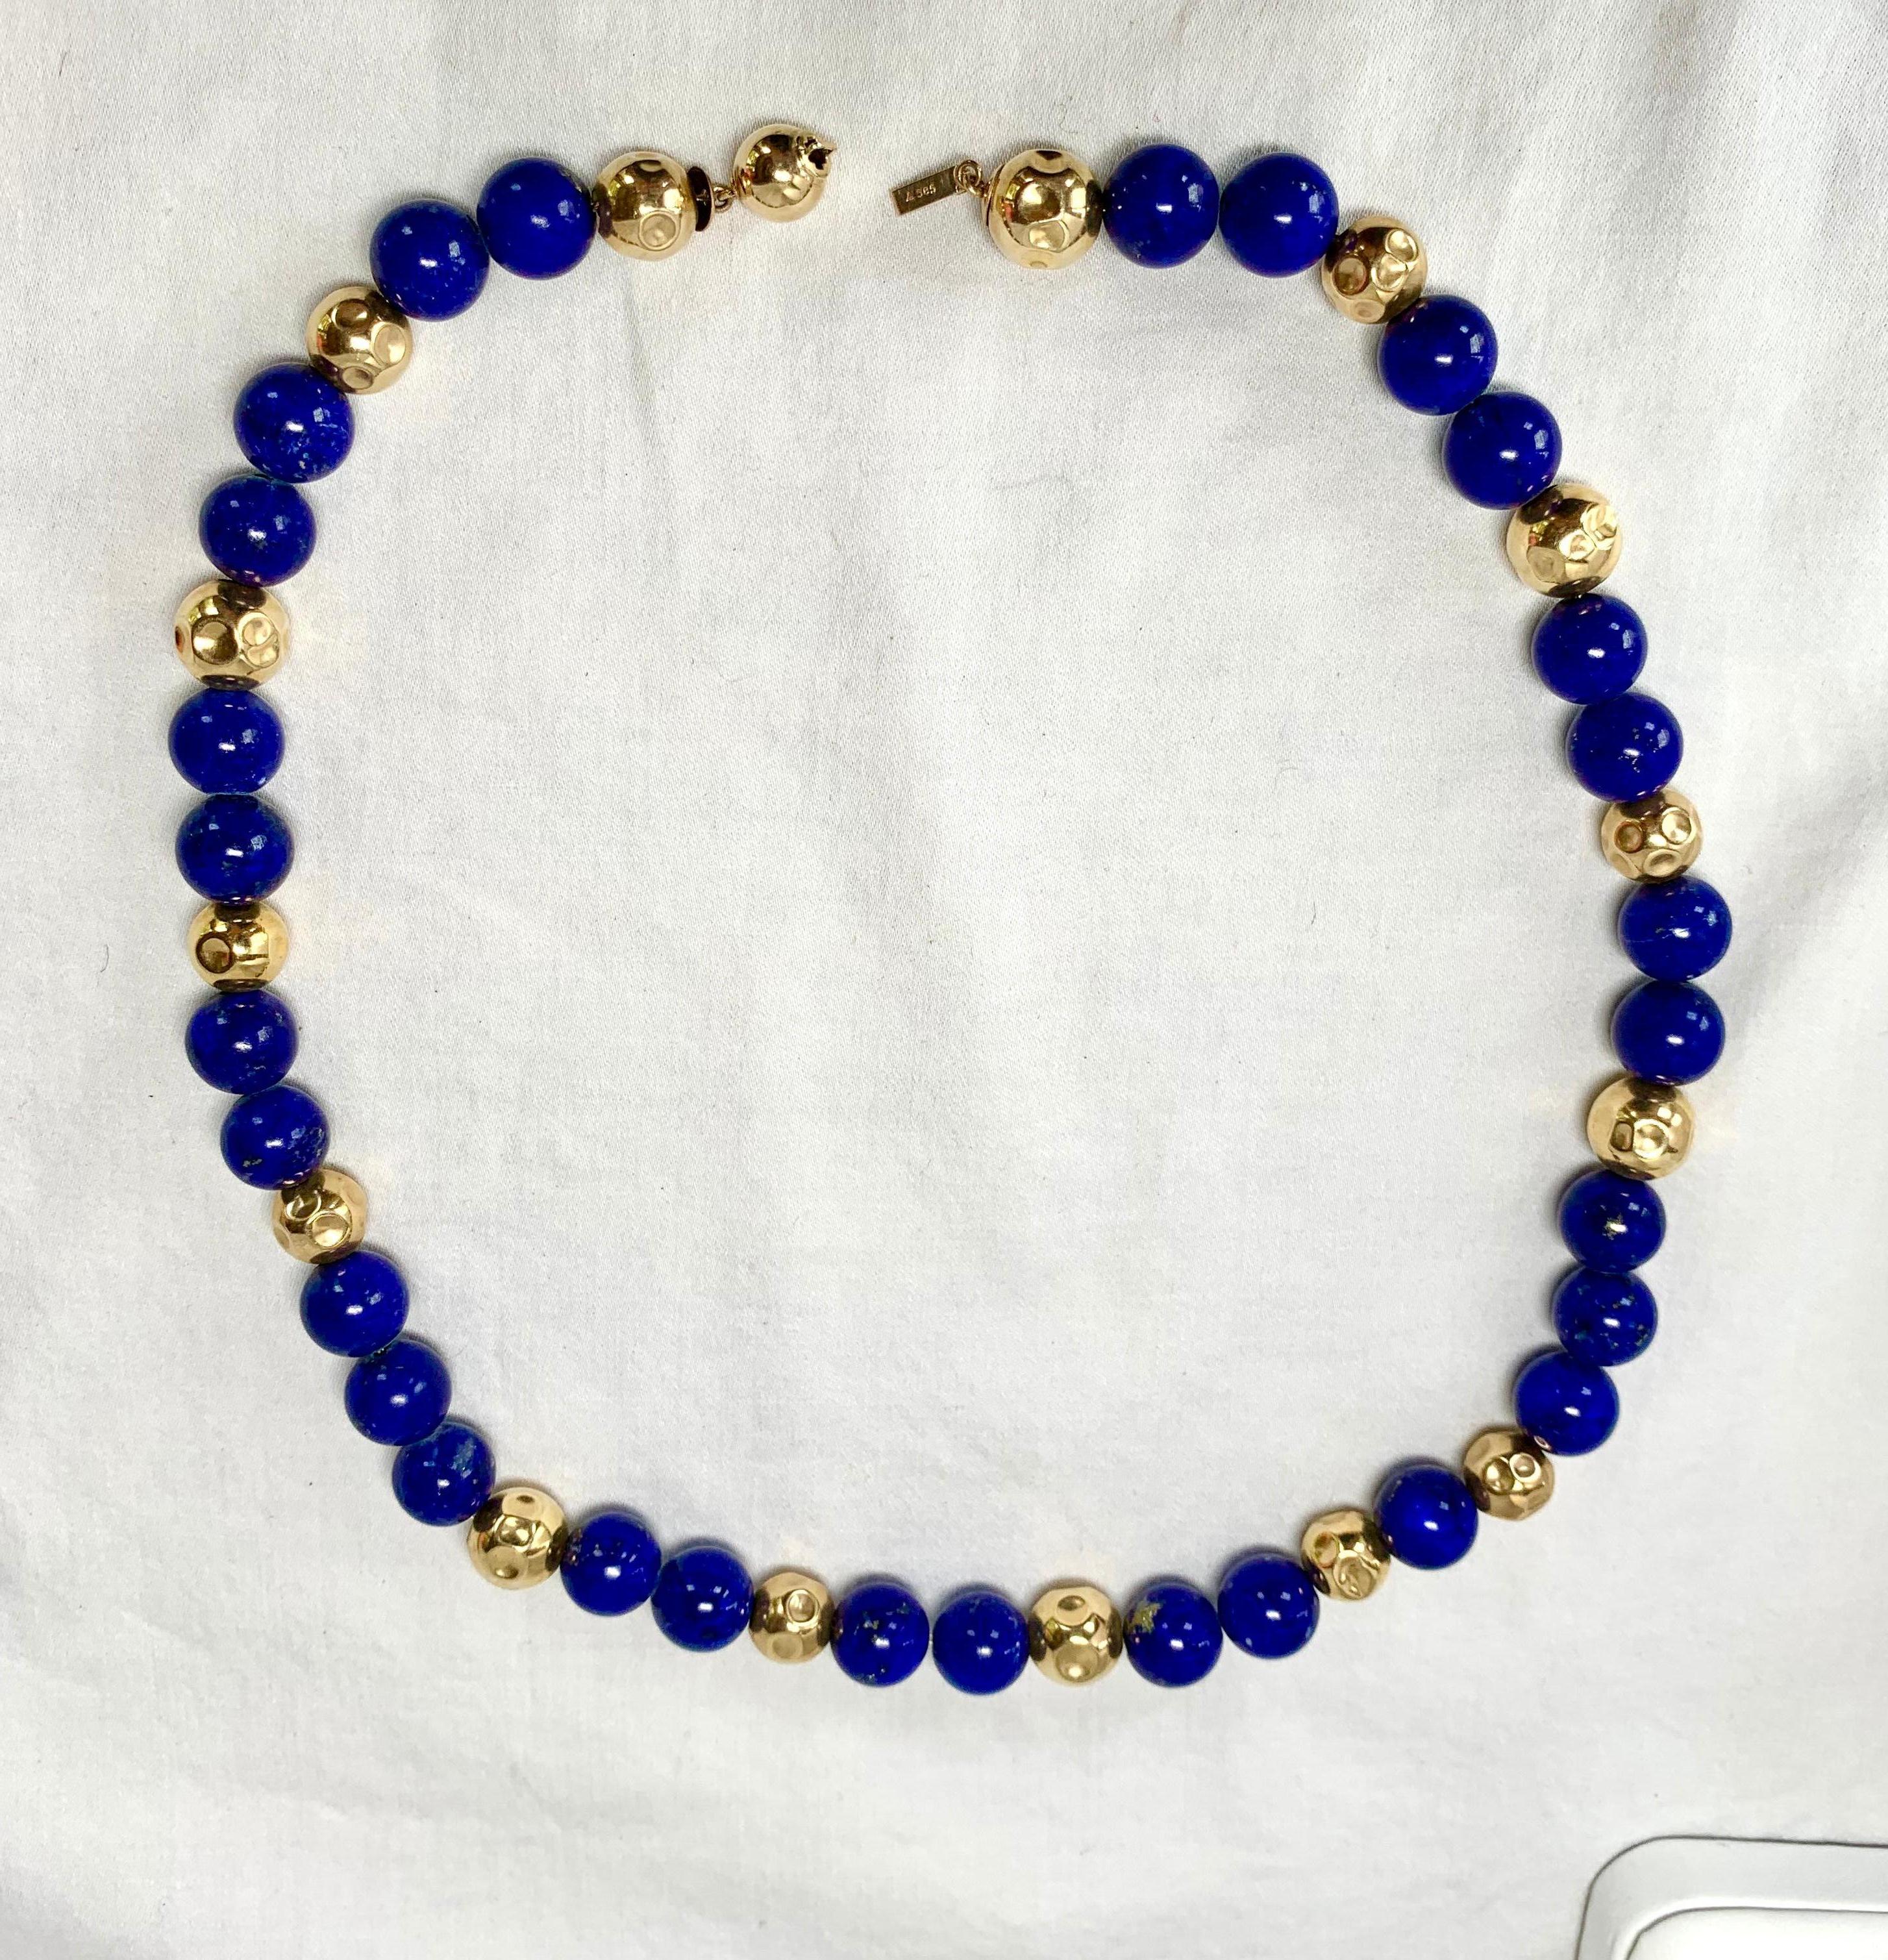 A STUNNING 17 INCH LONG LAPIS LAZULI AND 14 KARAT GOLD BEAD ESTATE NECKLACE.  THE VIVID BLUE LAPIS LAZULI BEADS ARE BEAUTIFULLY FLECKED WITH GOLD AND ARE 10MM IN DIAMETER.  THE LAPIS BEADS ARE SET WITH GORGEOUS 14 KARAT GOLD BEADS WITH DECORATIVE